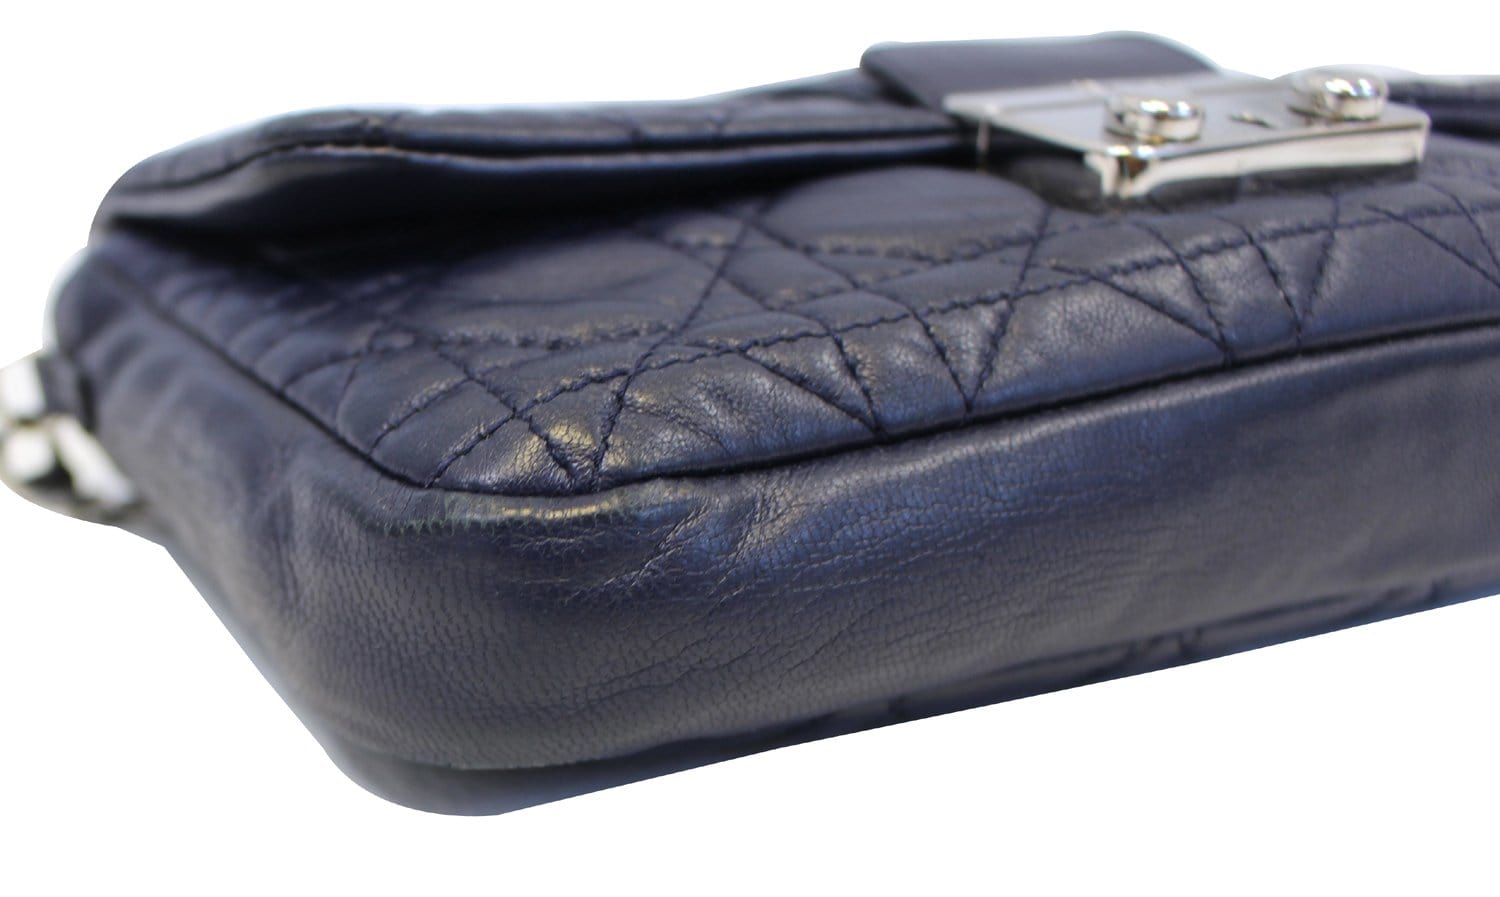 CHRISTIAN DIOR Miss Dior Cannage Quilted Leather Crossbody Bag